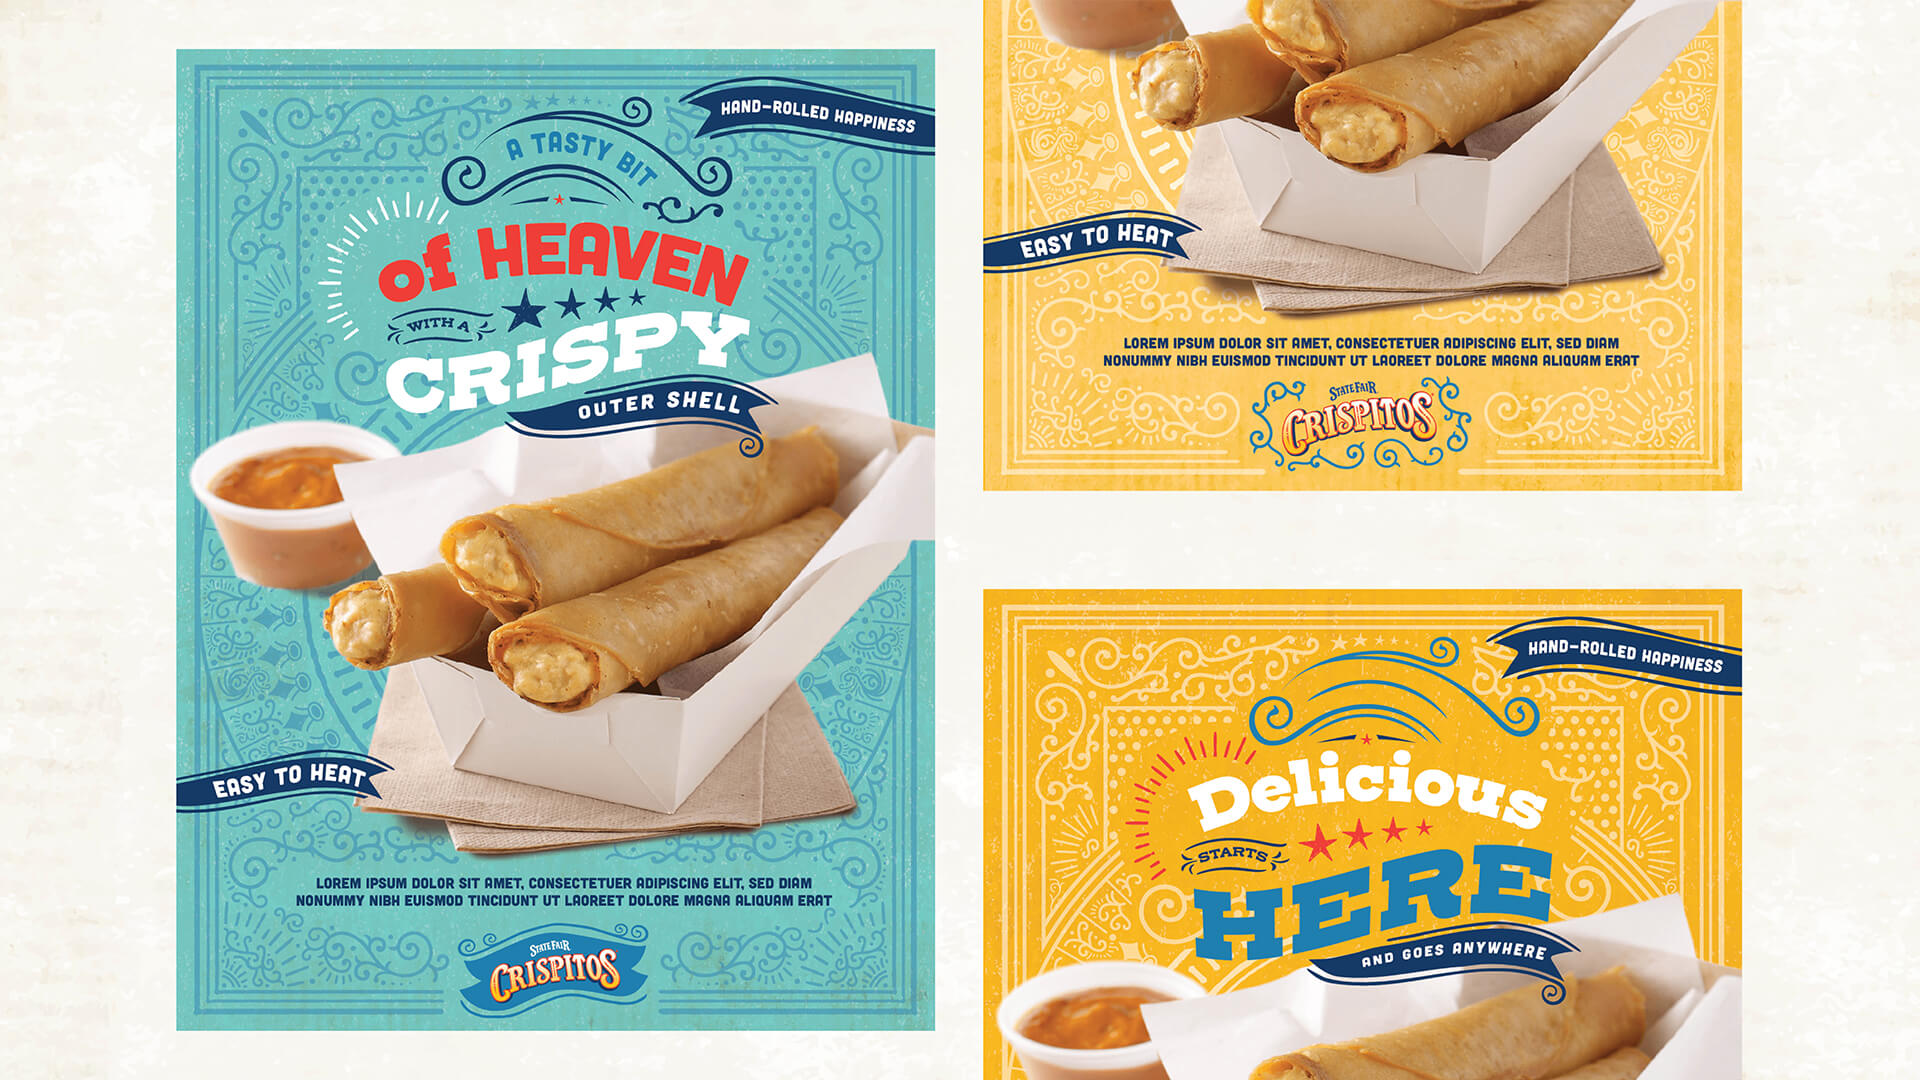 State Fair Crispitos A Tasty Bit of Heaven With A Crispy Outer Shell & Delicious Starts Here